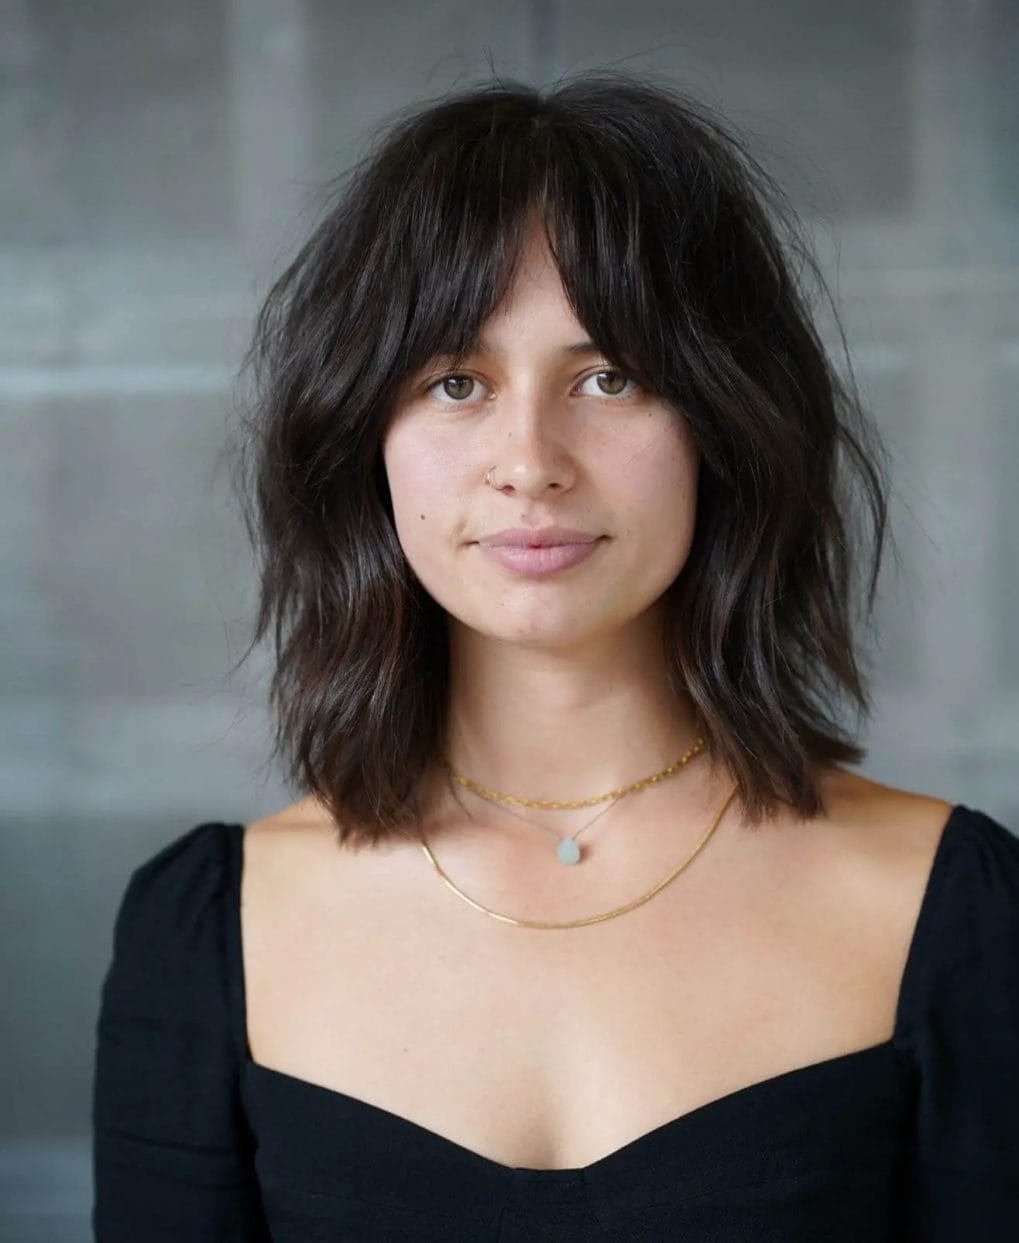 Tousled, shoulder-length lob with chocolate and caramel tones and chic curtain bangs.